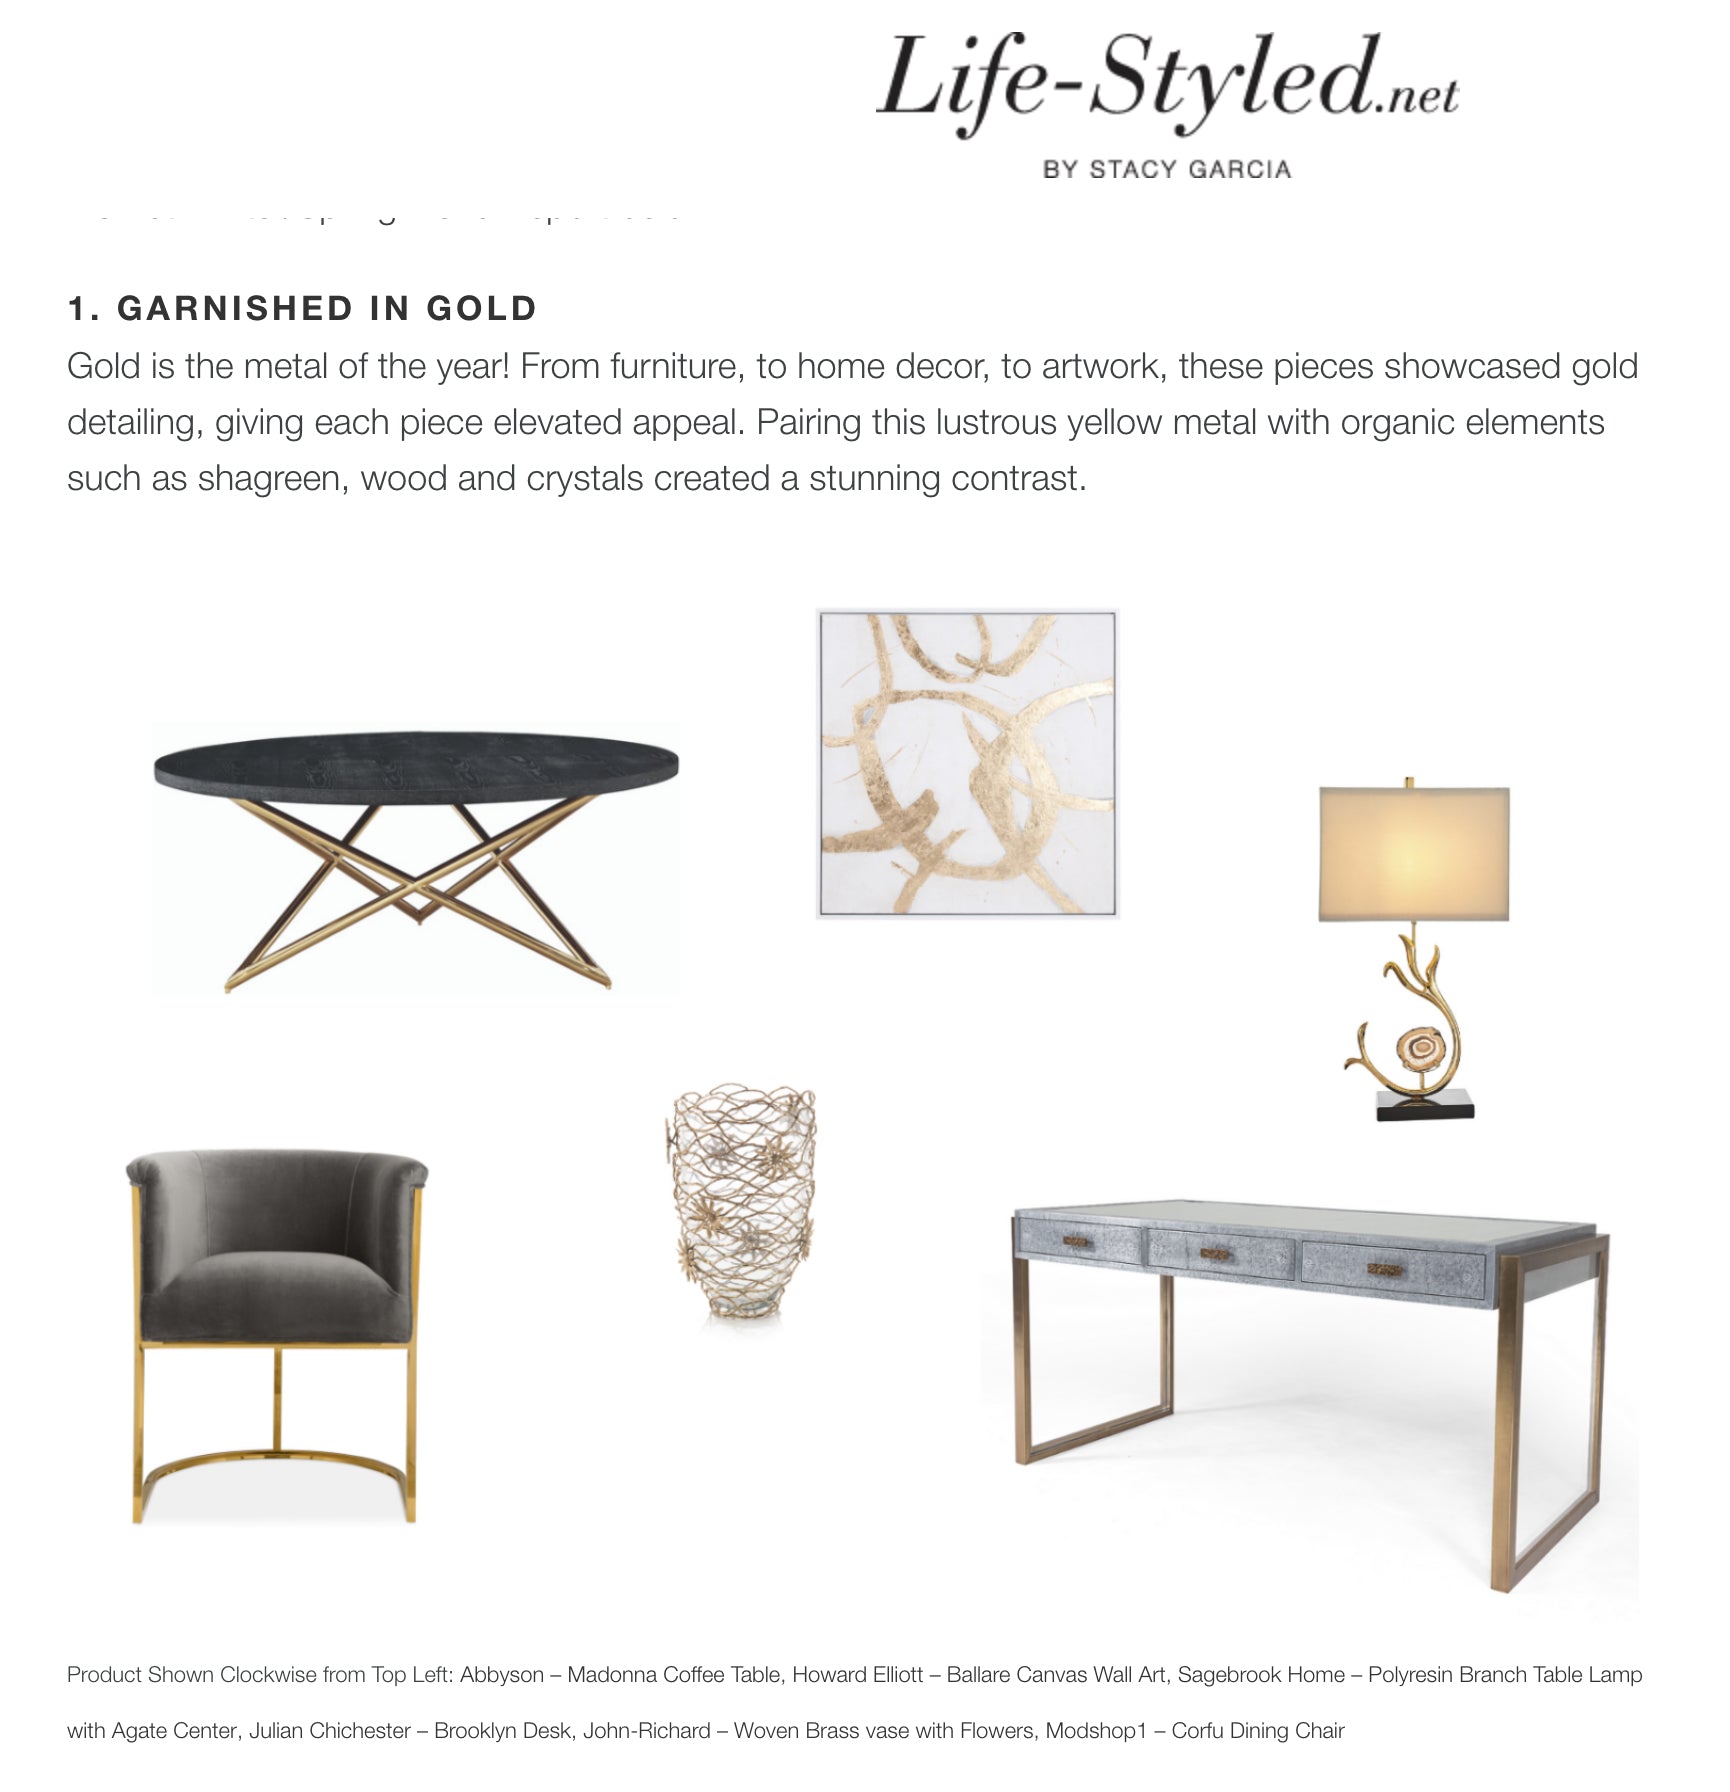 high point market style report article life-styled.net by stacy garcia featuring modshop's corfu dining chair